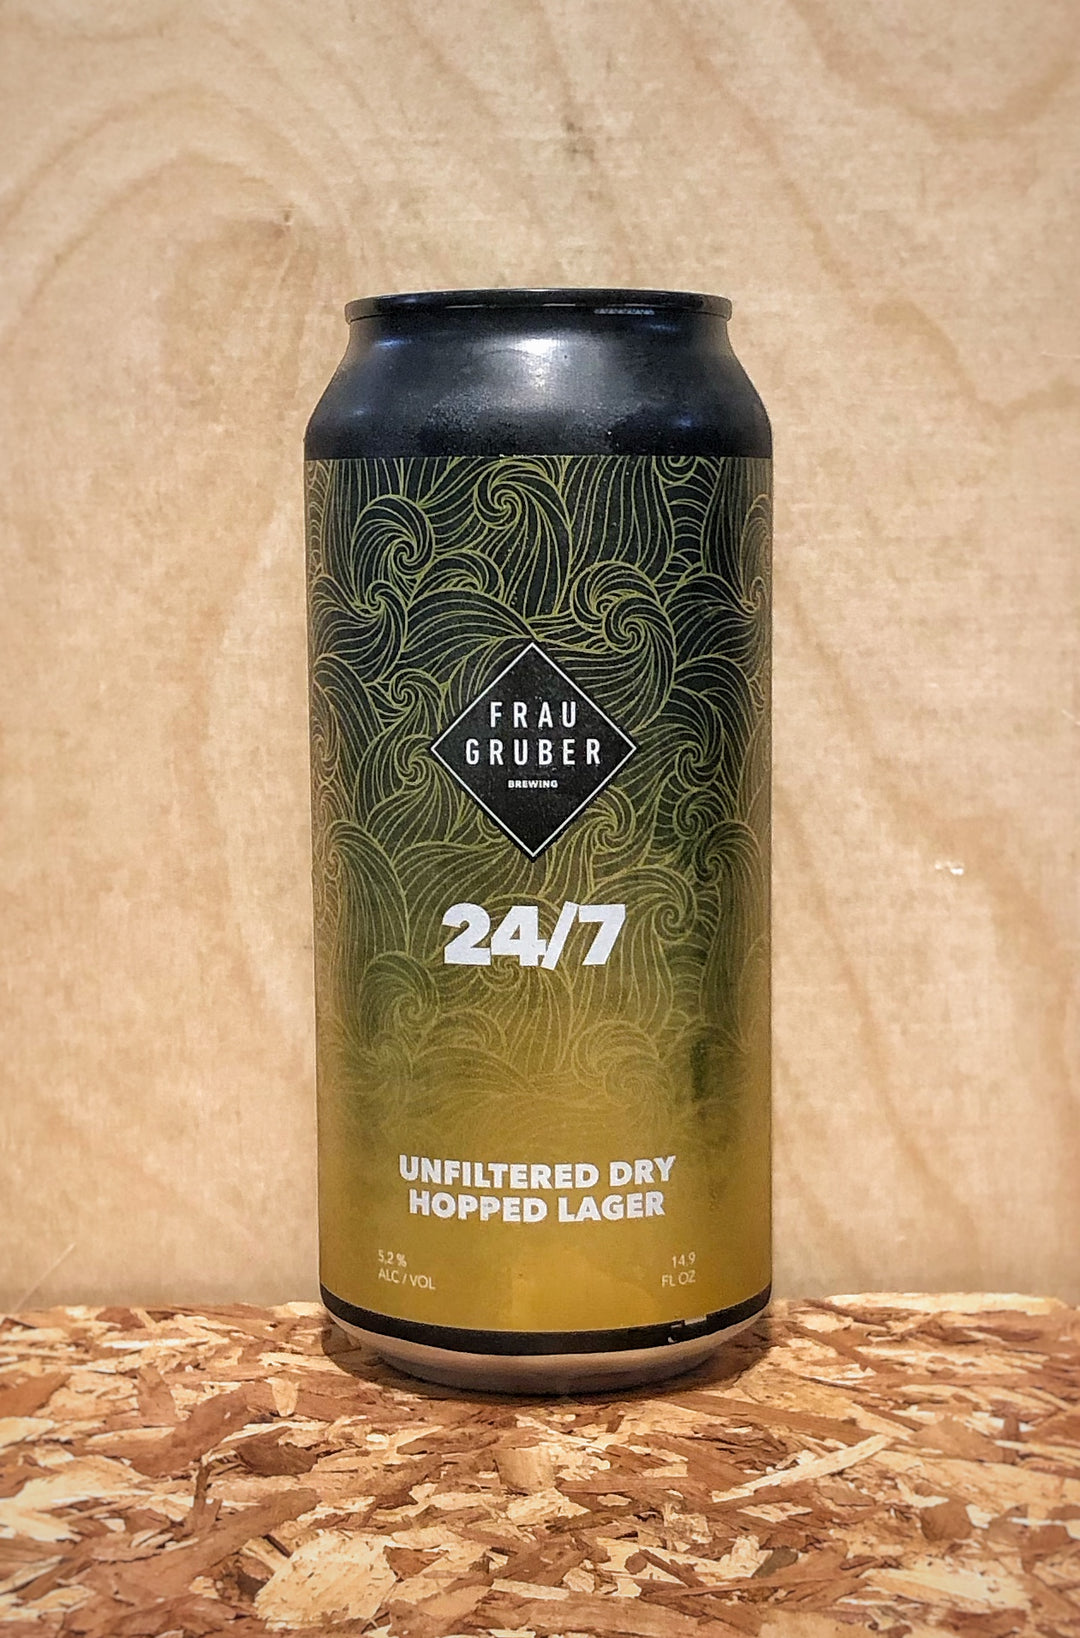 FrauGruber Brewing '24/7' Unfiltered Dry Hopped Lager (Bayern, Germany)